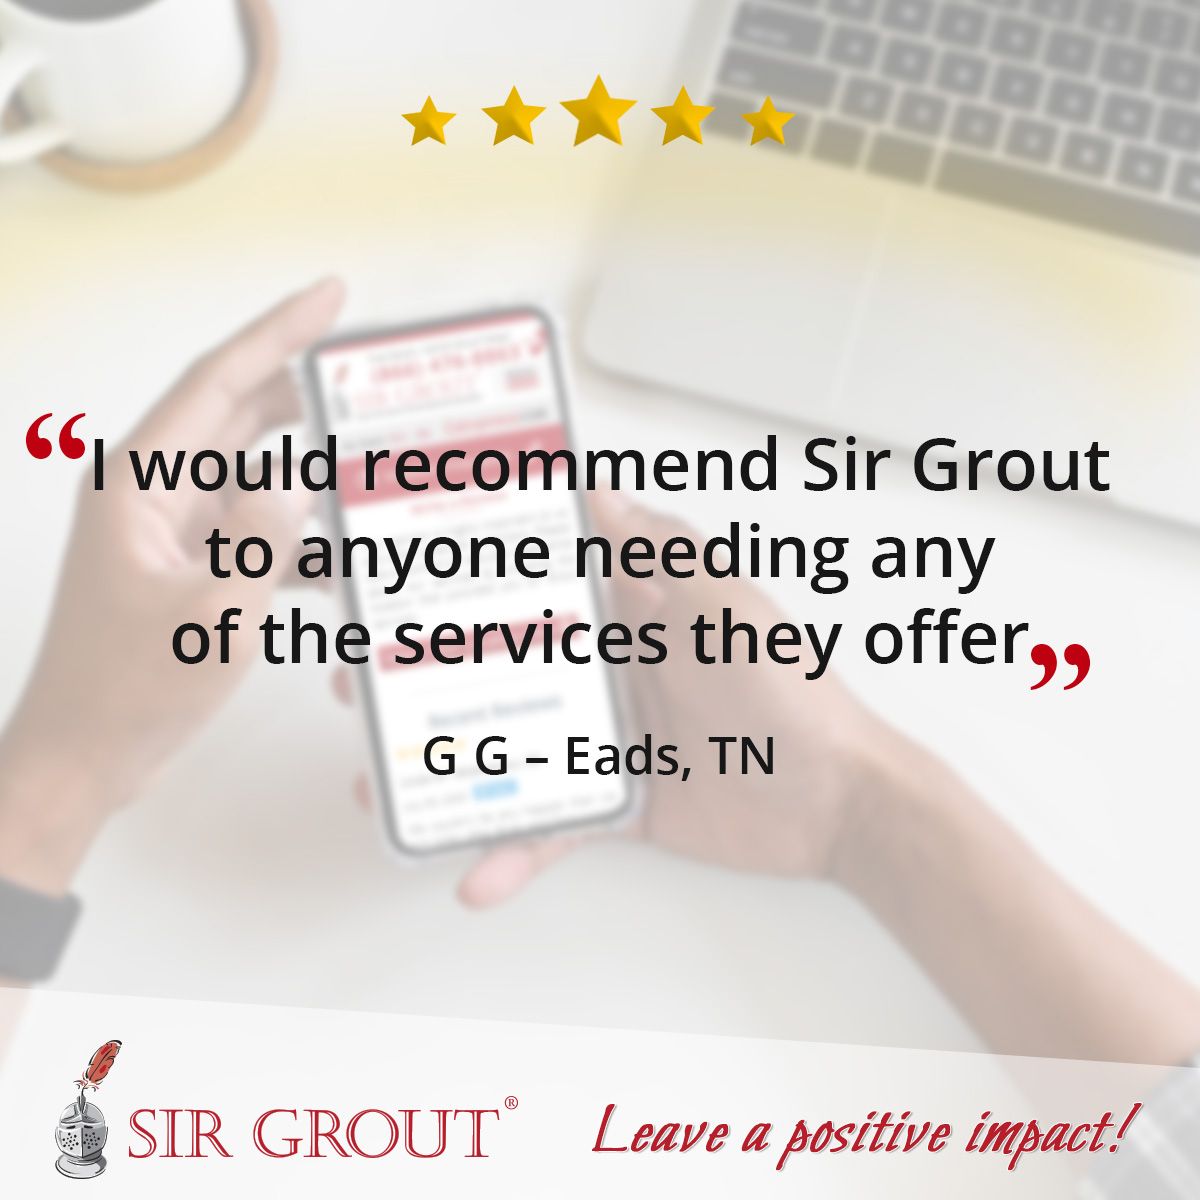 I would recommend Sir Grout to anyone needing any of the services they offer